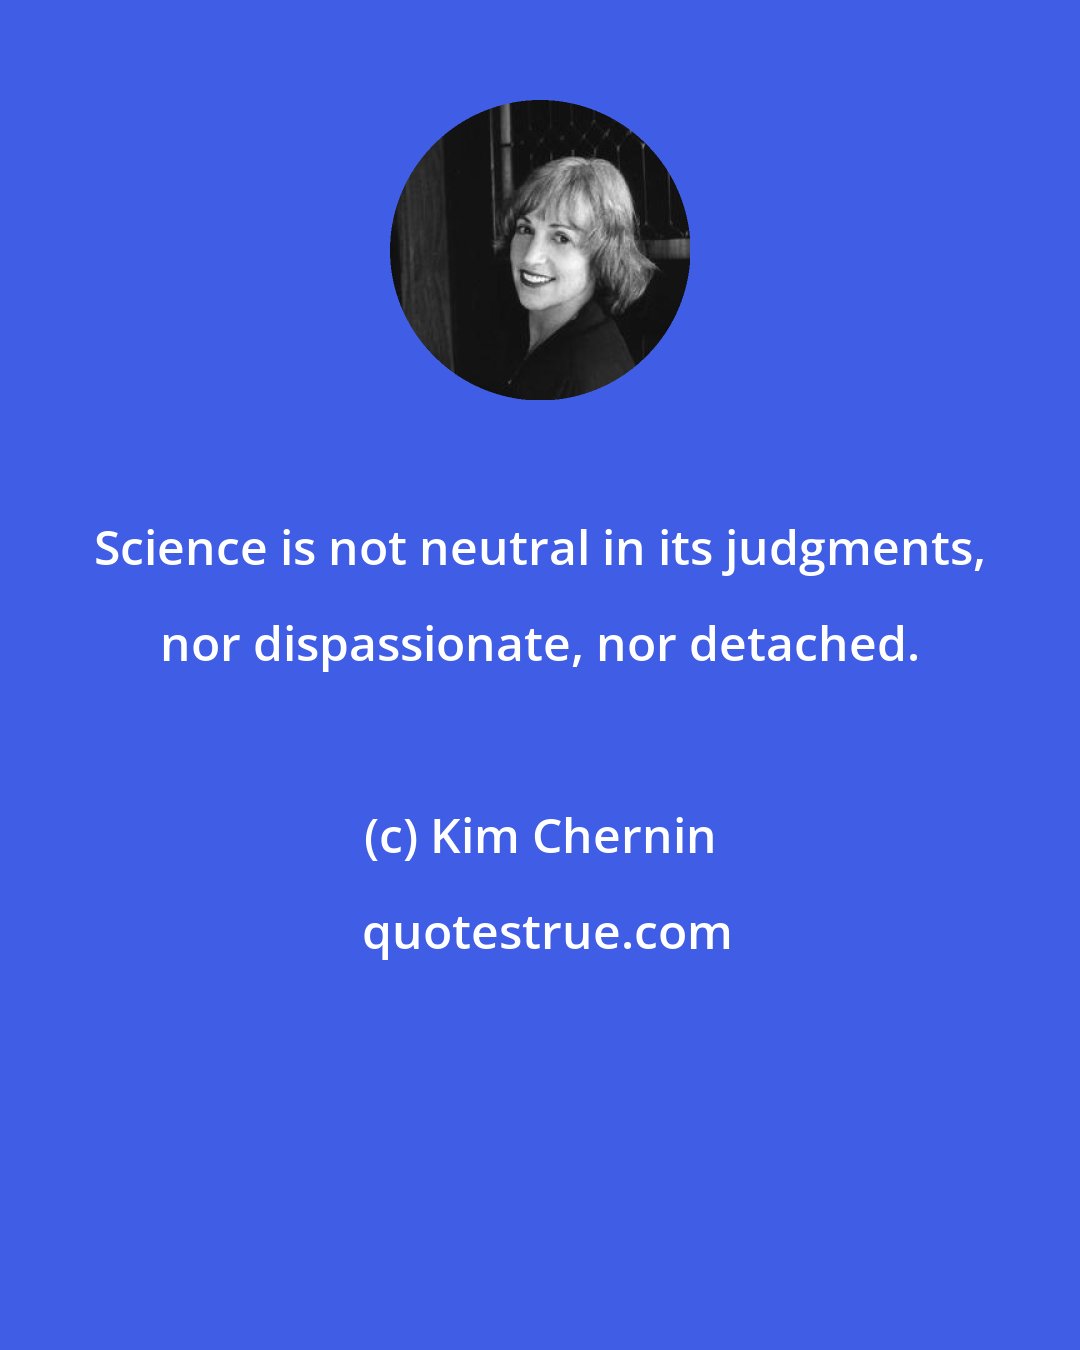 Kim Chernin: Science is not neutral in its judgments, nor dispassionate, nor detached.